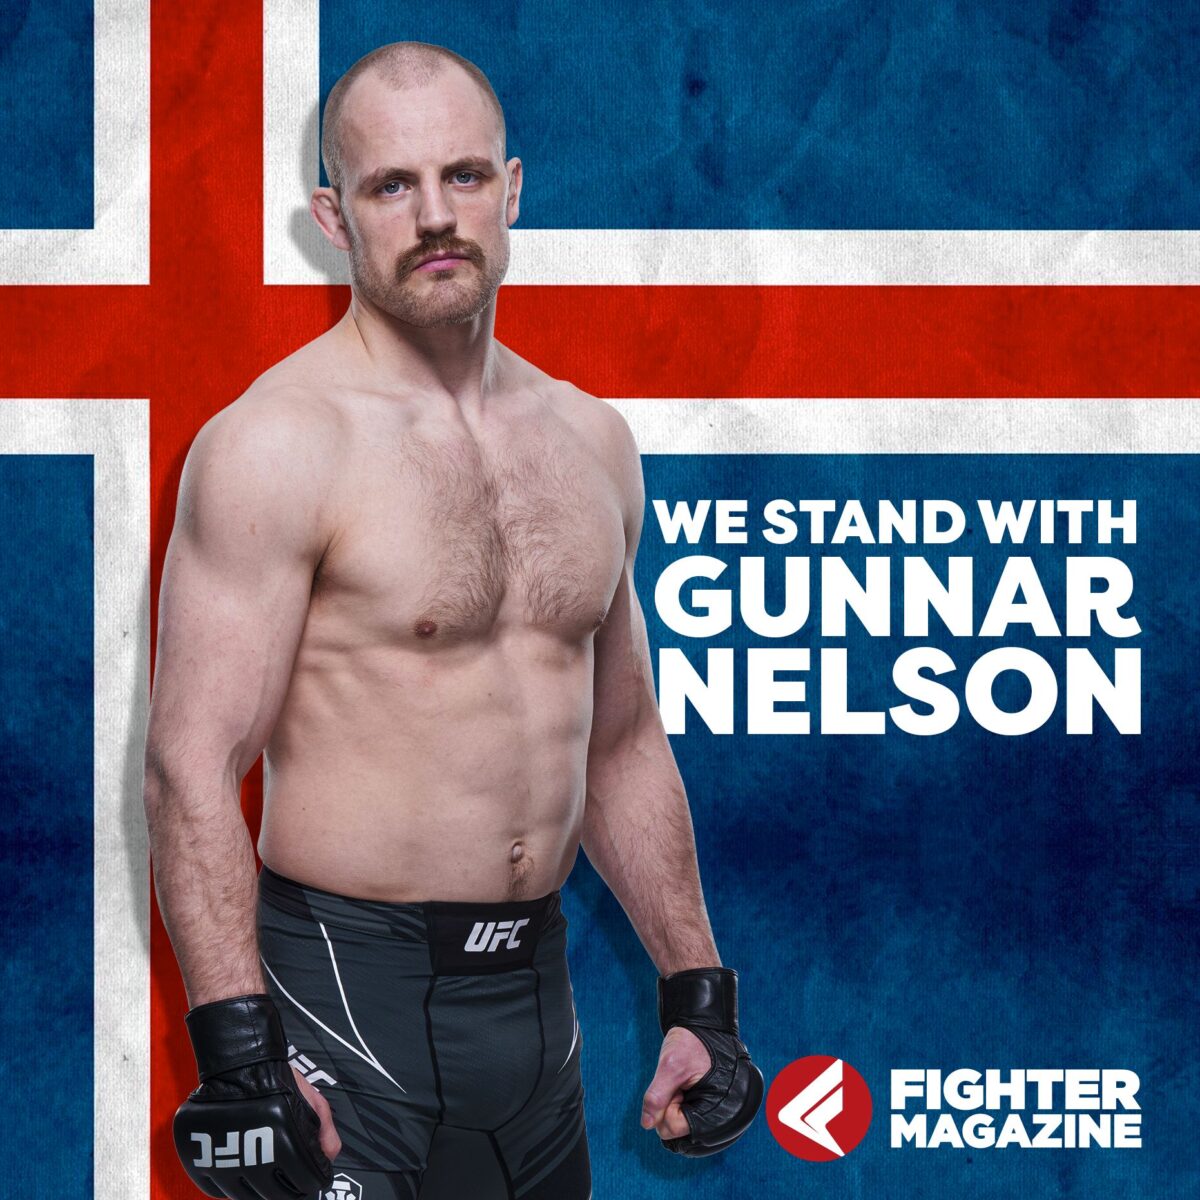 The Viking Gene: Exclusive interview with Gunnar Nelson